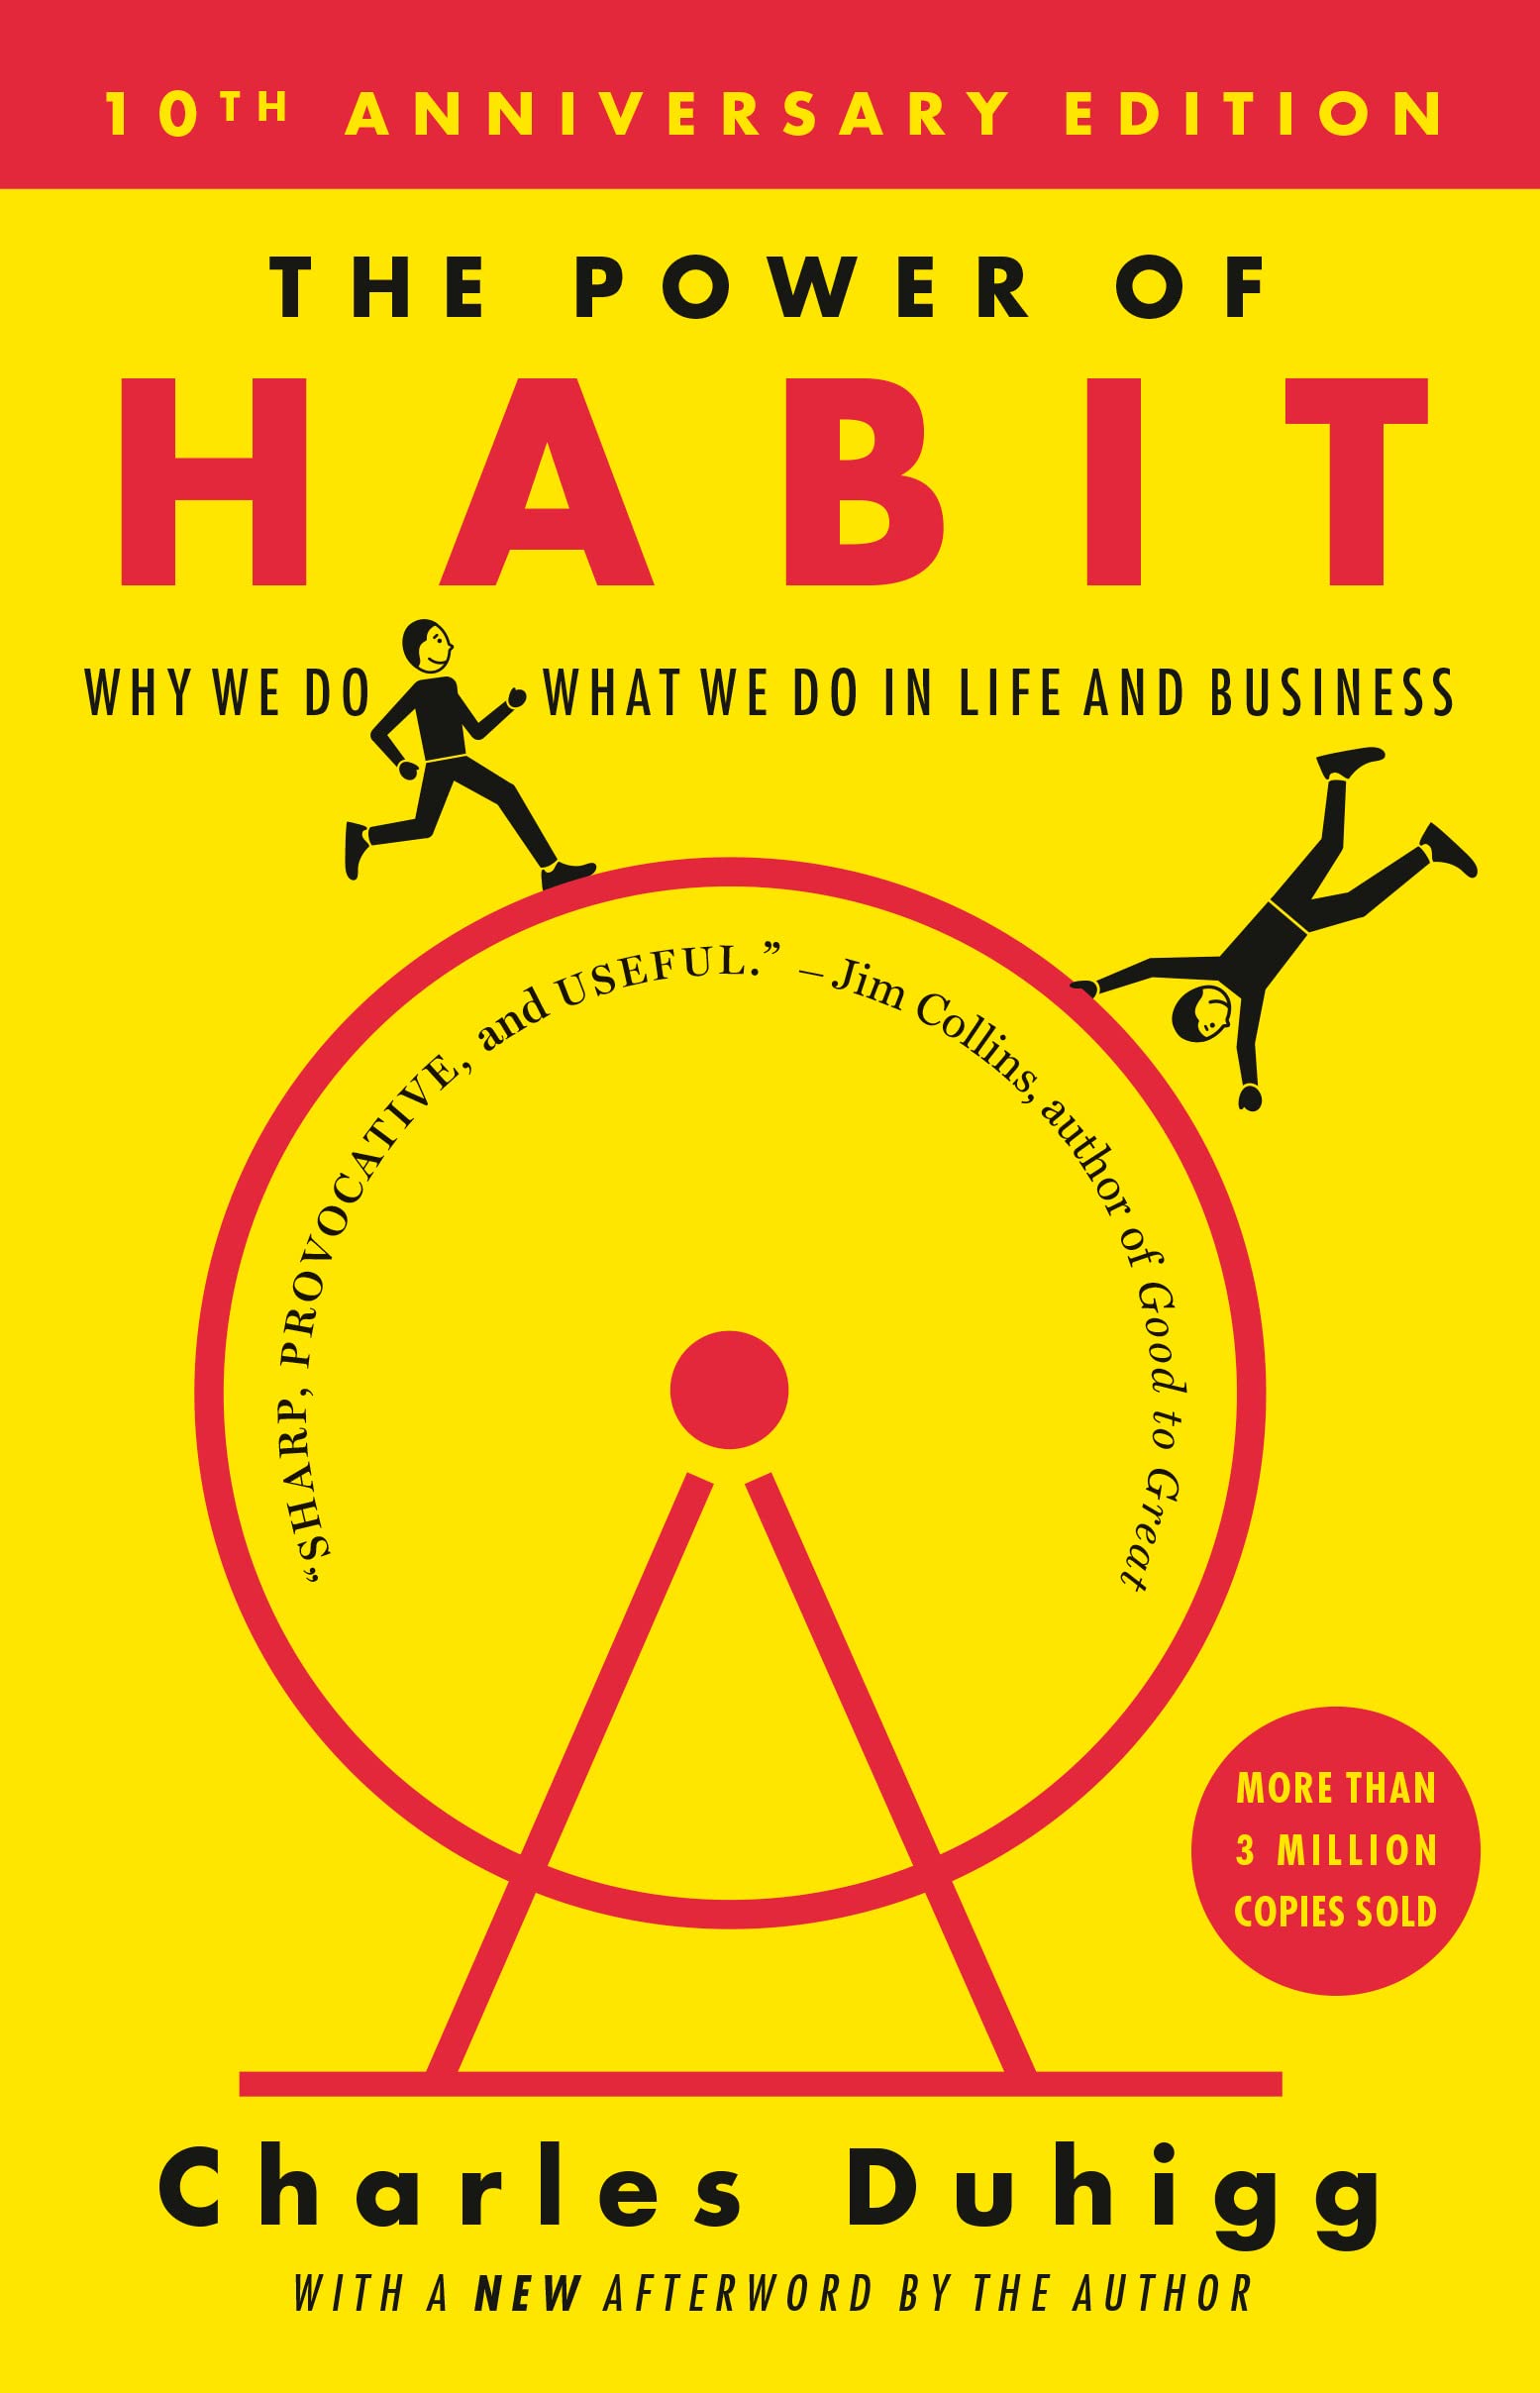 The Power of Habit: Why We Do What We Do in Life and Business (eBook) by Charles Duhigg $1.99